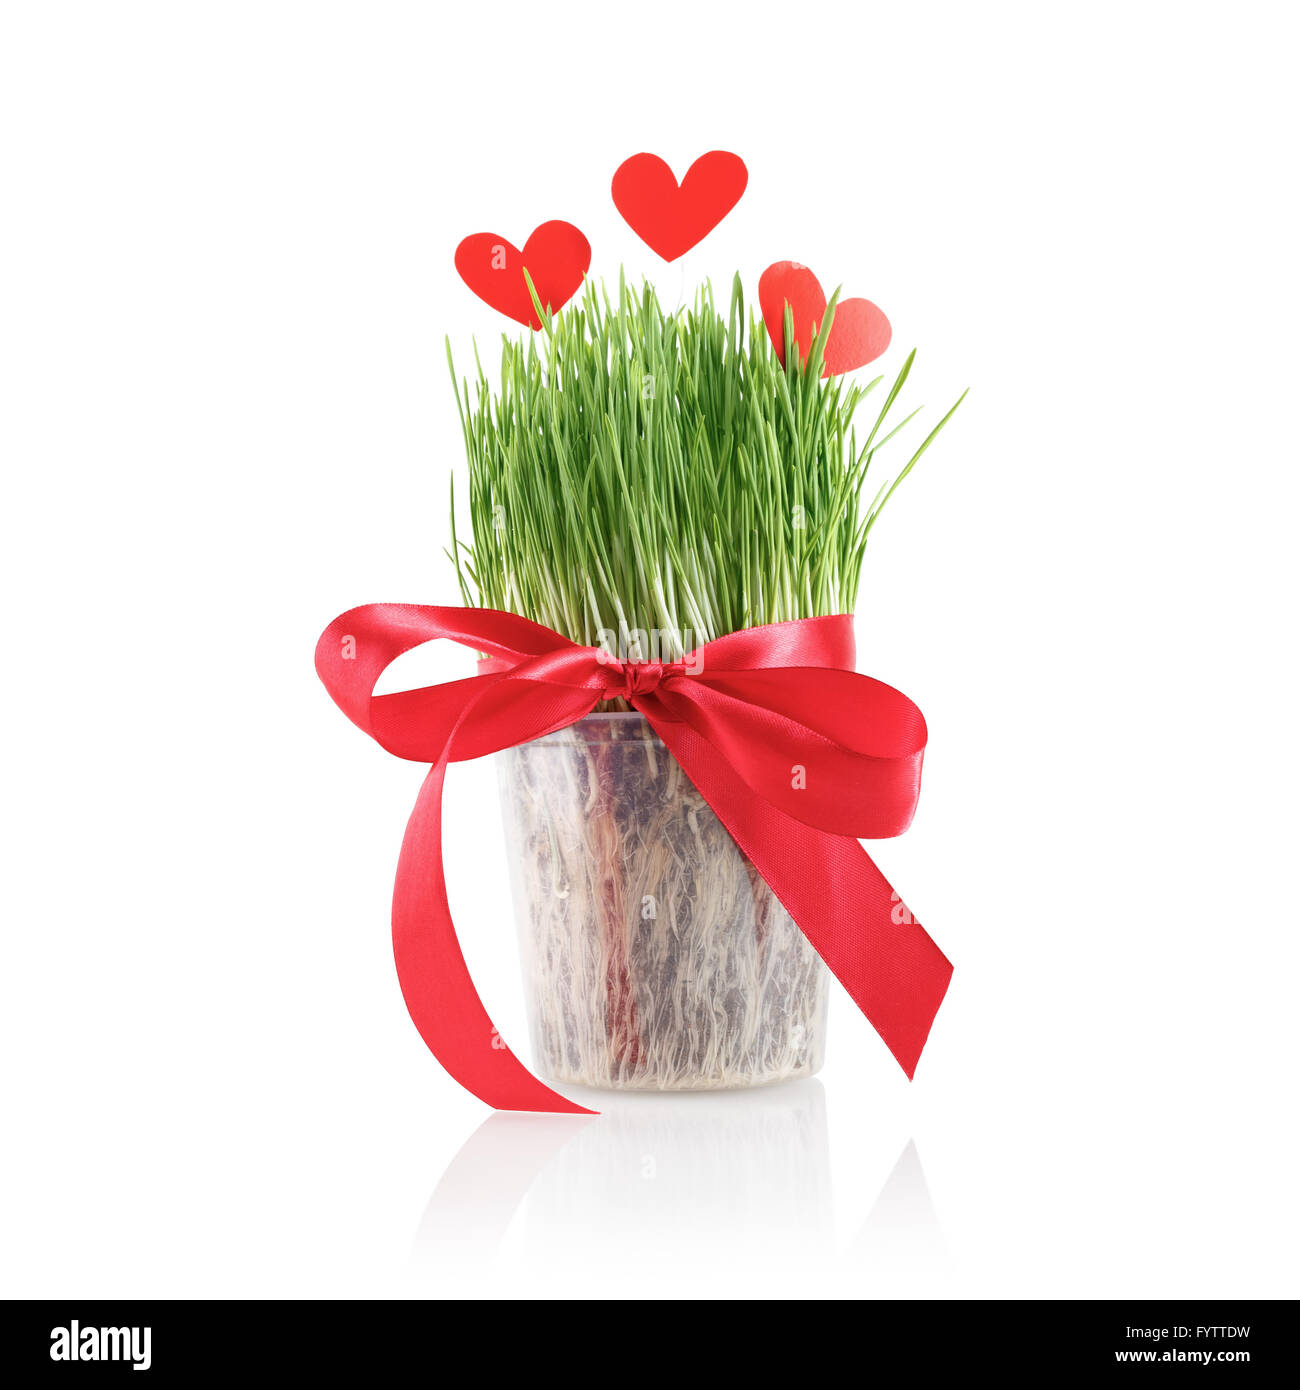 Green grass and red paper hearts Stock Photo